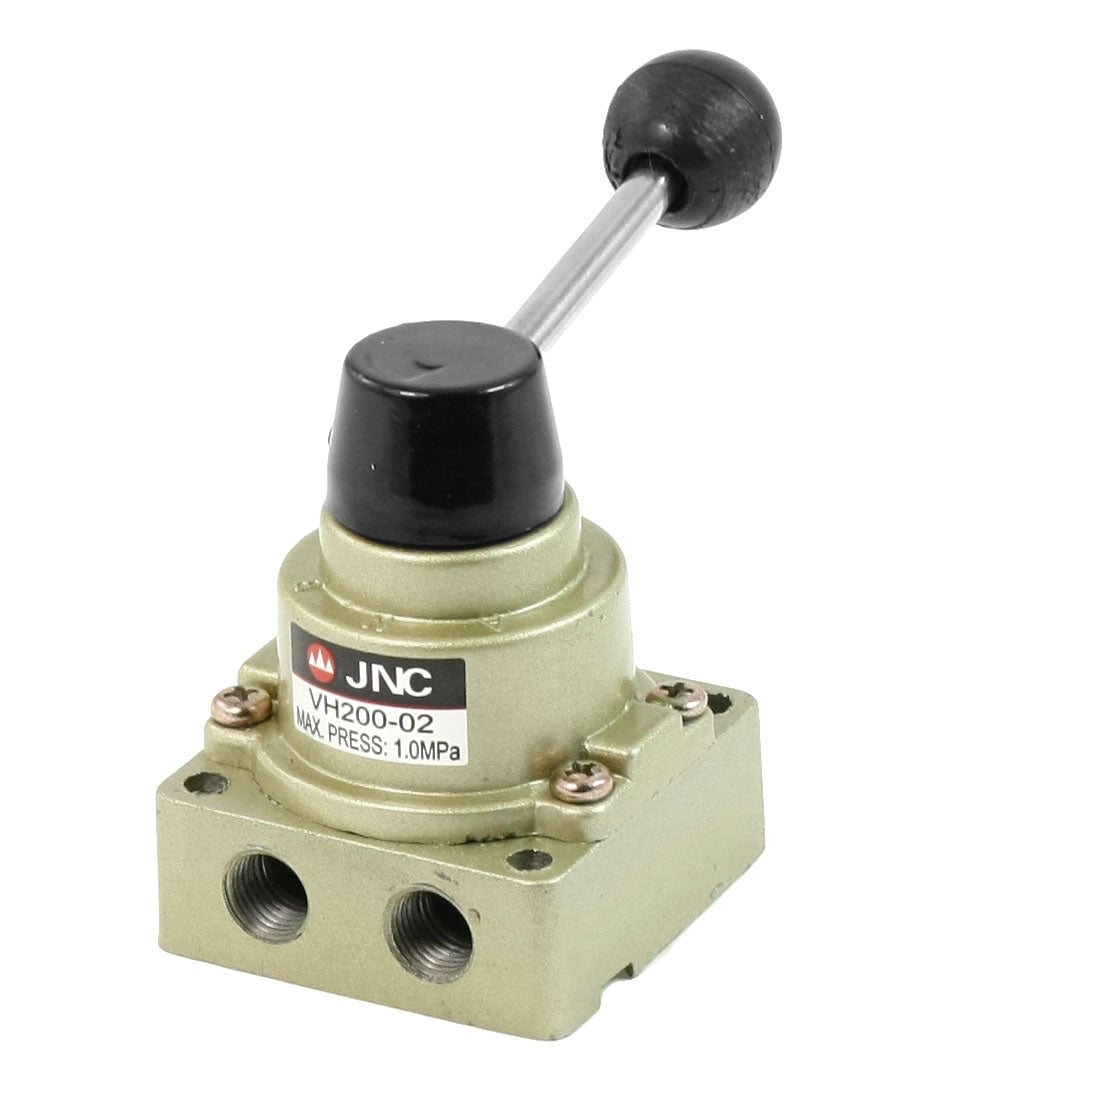 uxcell Uxcell VH200-02 1/4"PT Direct Action 3 Position 2 Way Pneumatic Hand Lever Turn Valve